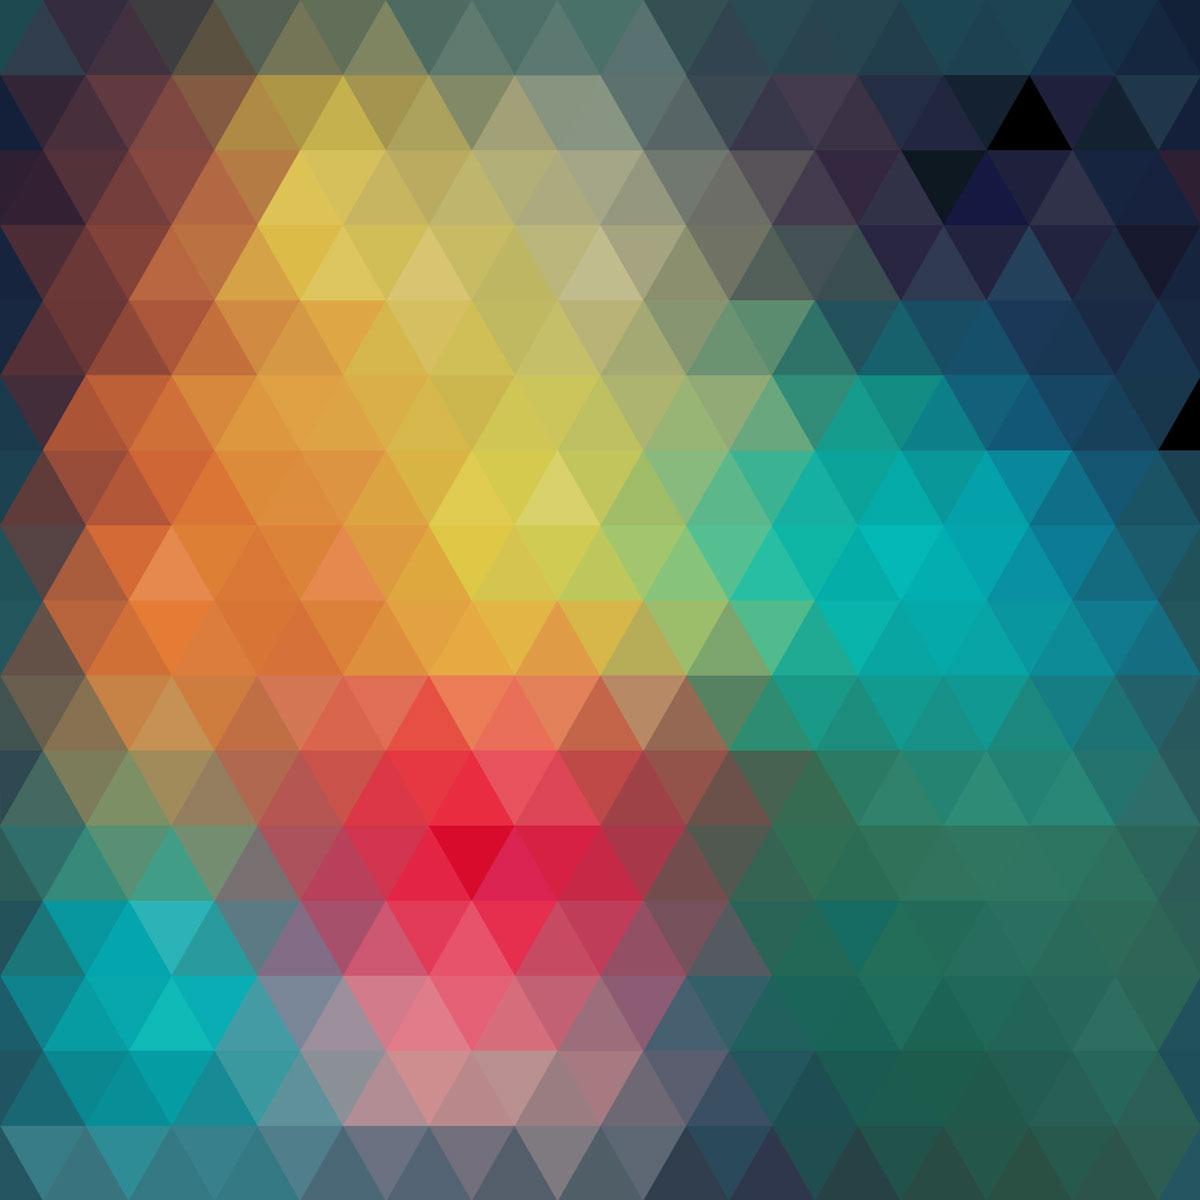 Colorful triangles arranged in decorative abstract background in the